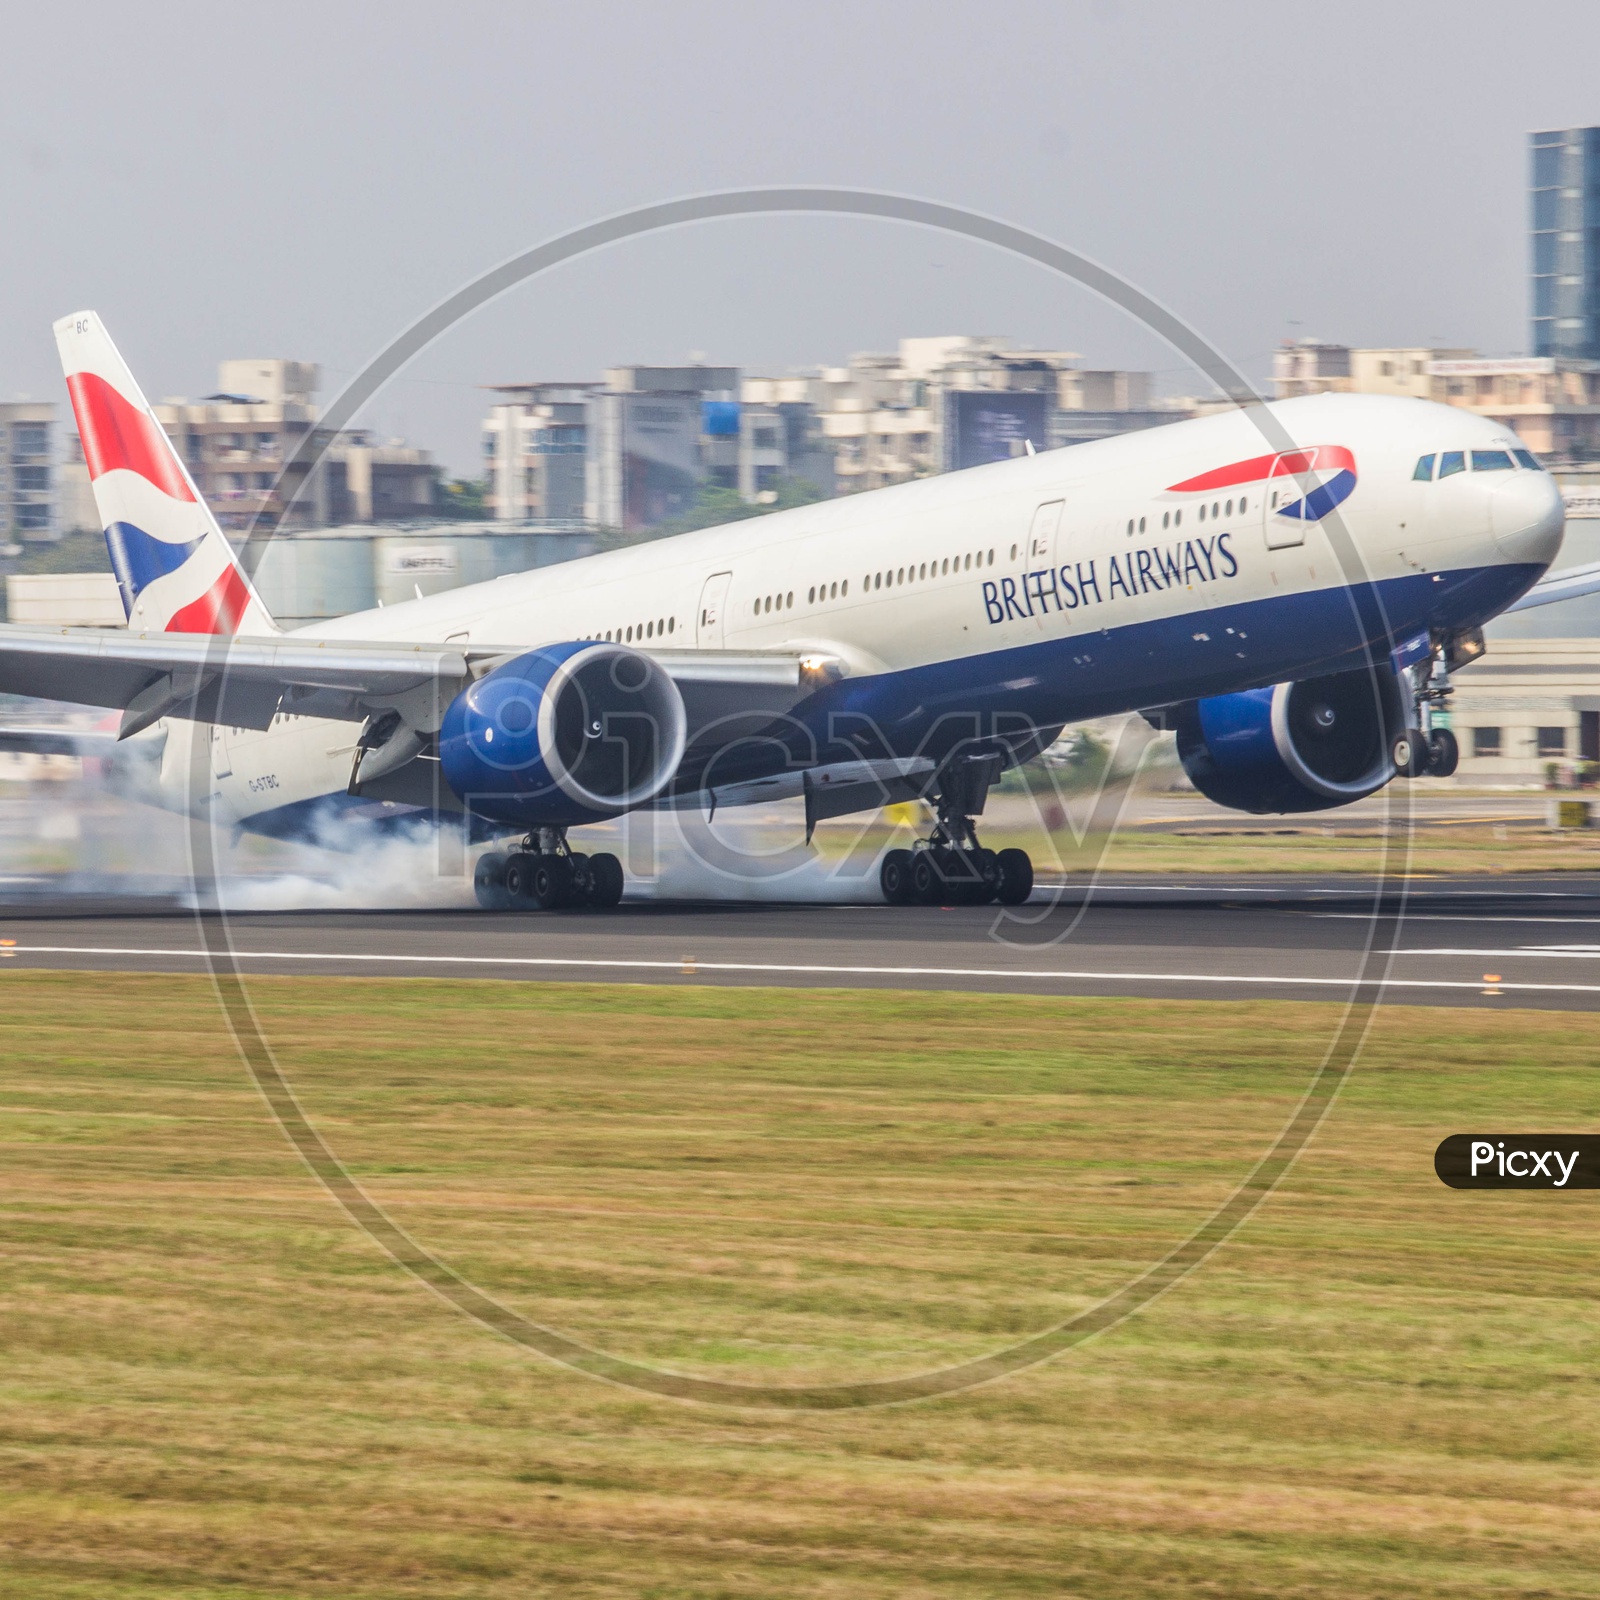 British airways B777 touching down after its flight from London.